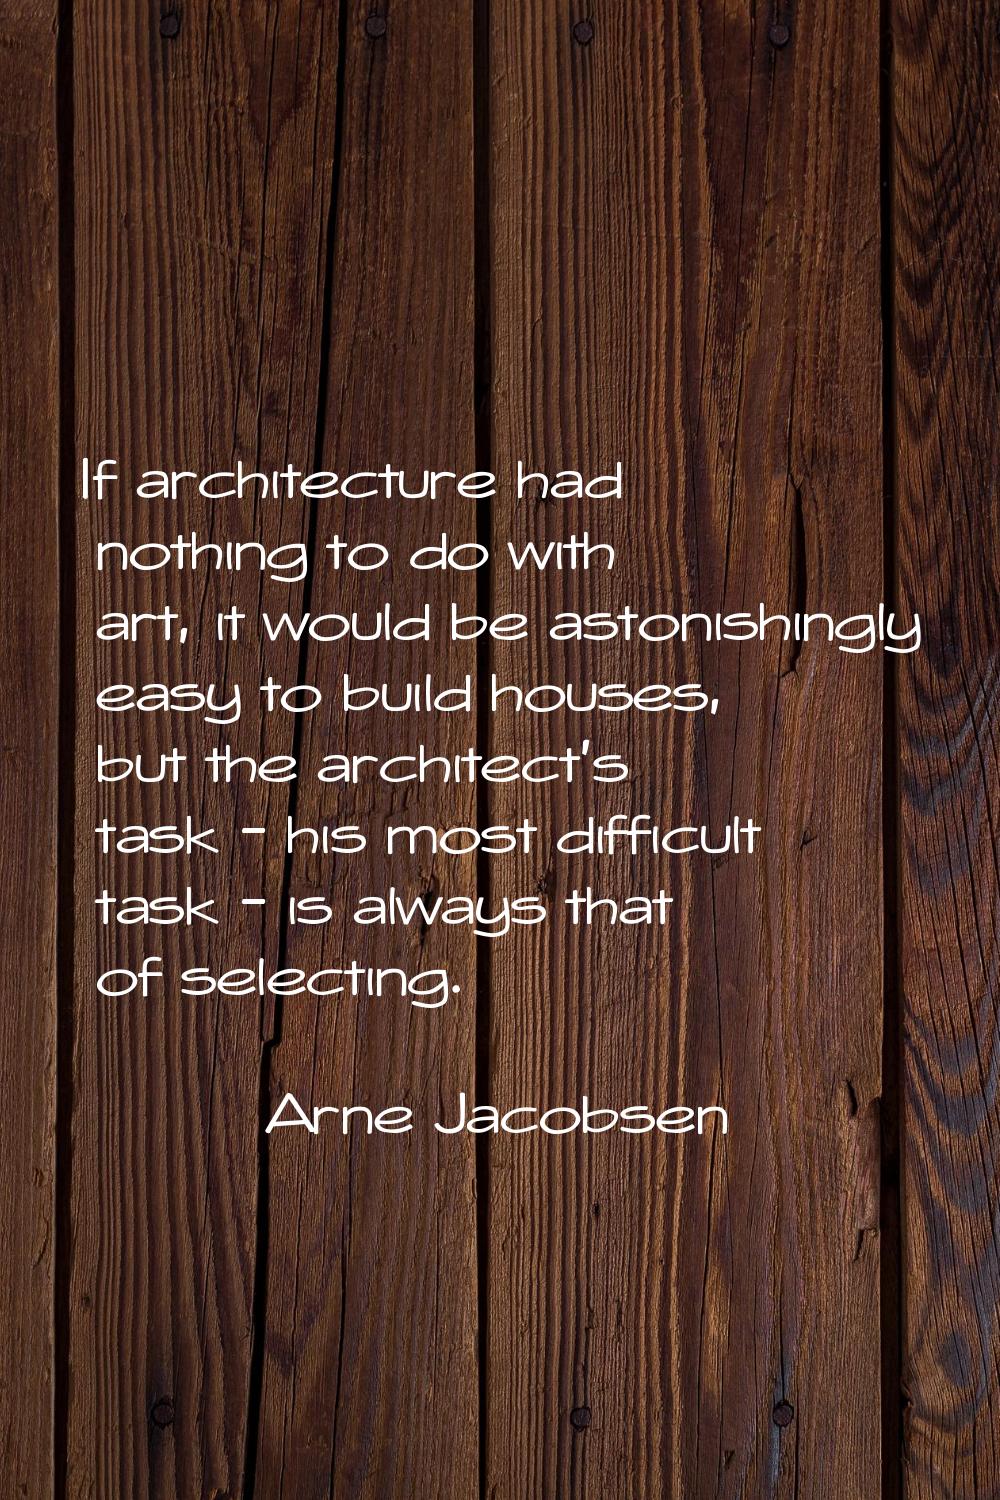 If architecture had nothing to do with art, it would be astonishingly easy to build houses, but the